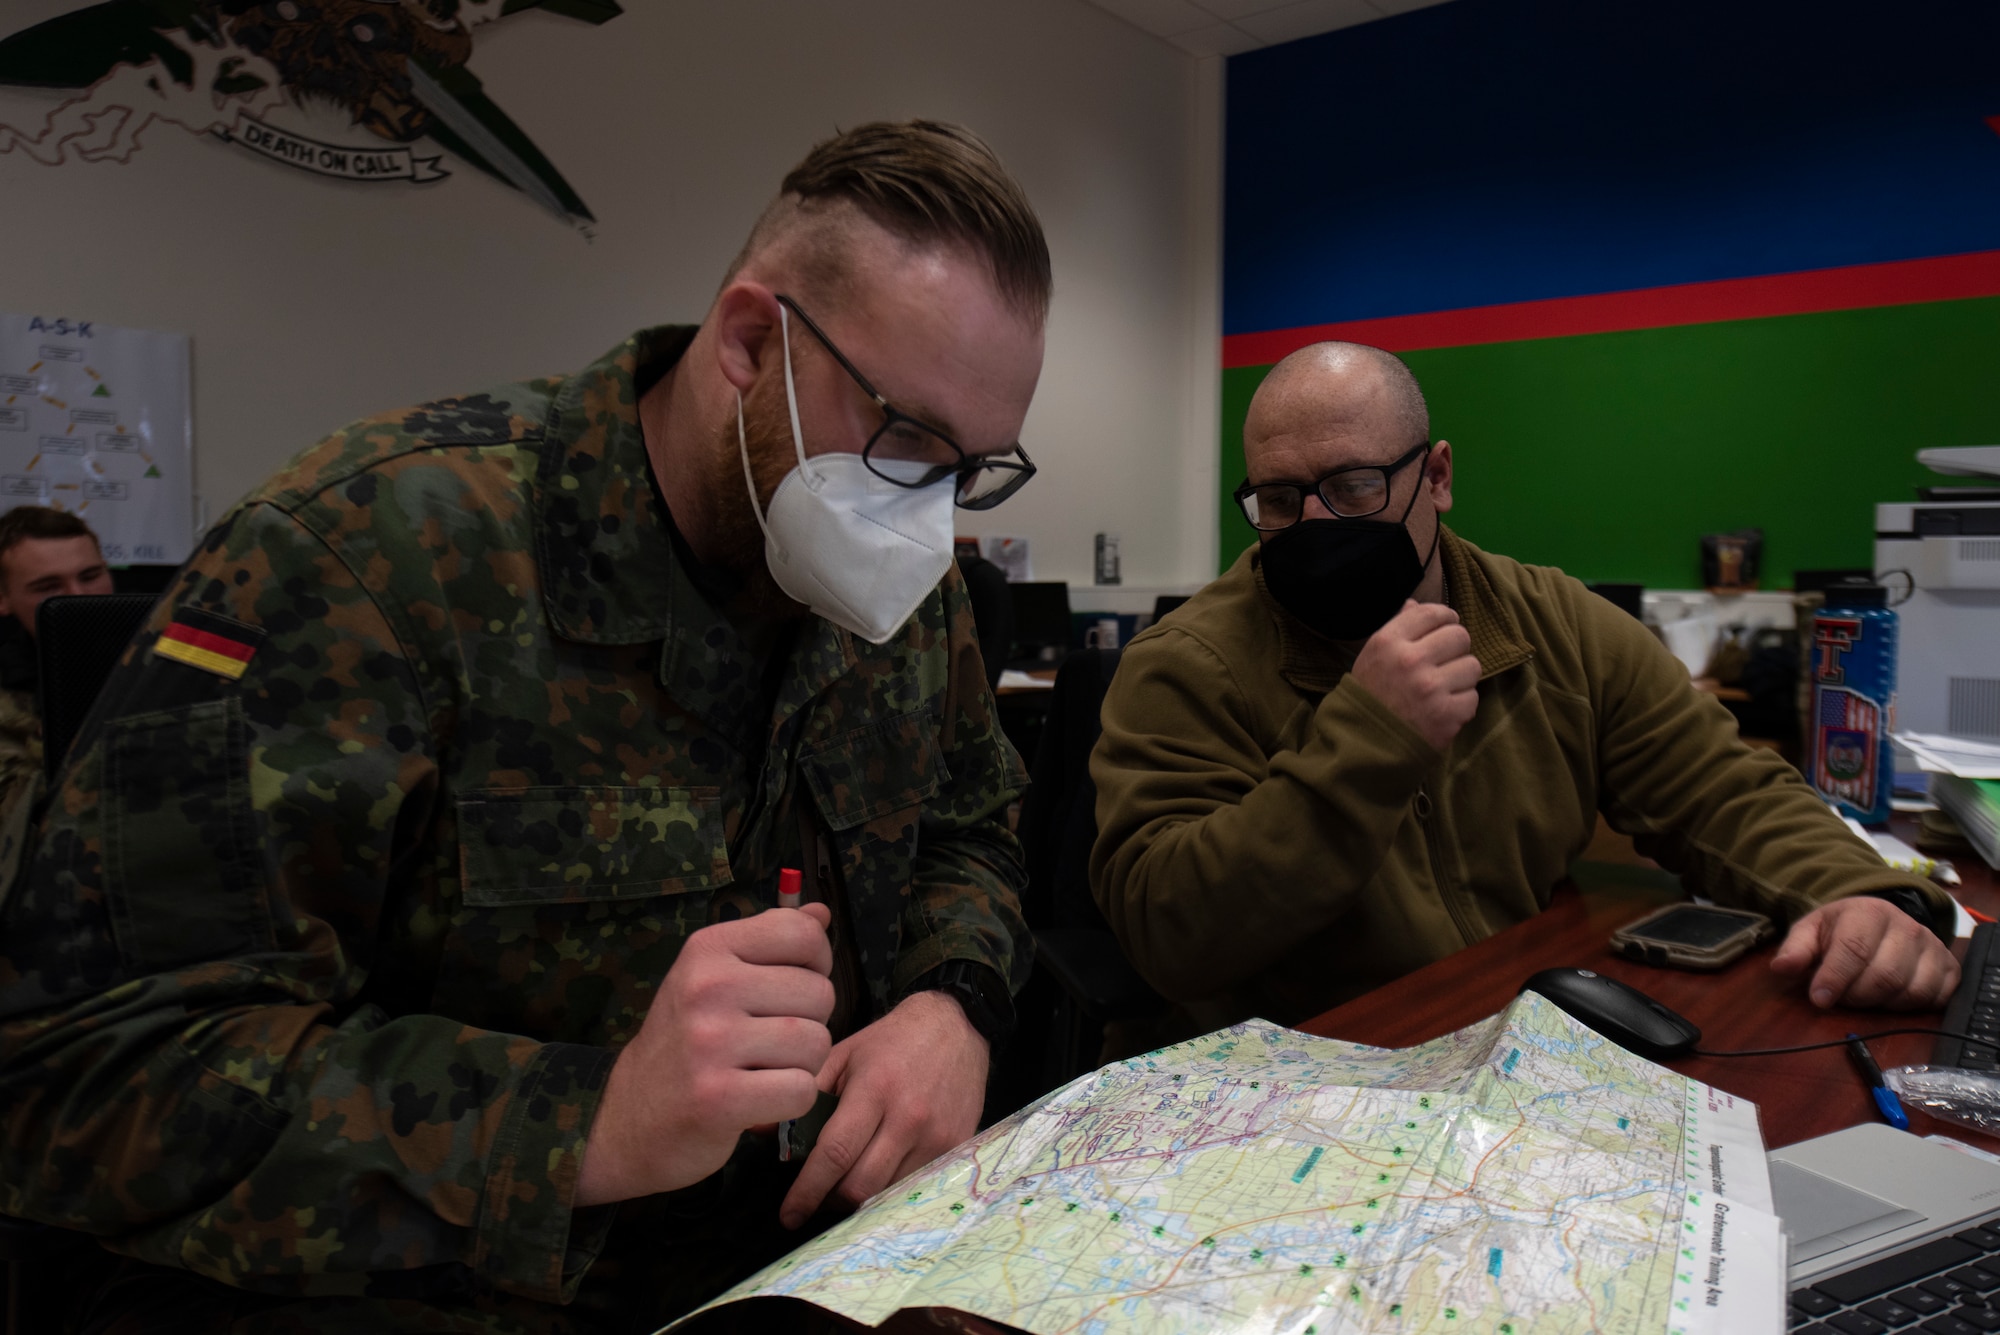 An Airman talks with a member of the German armed forces.